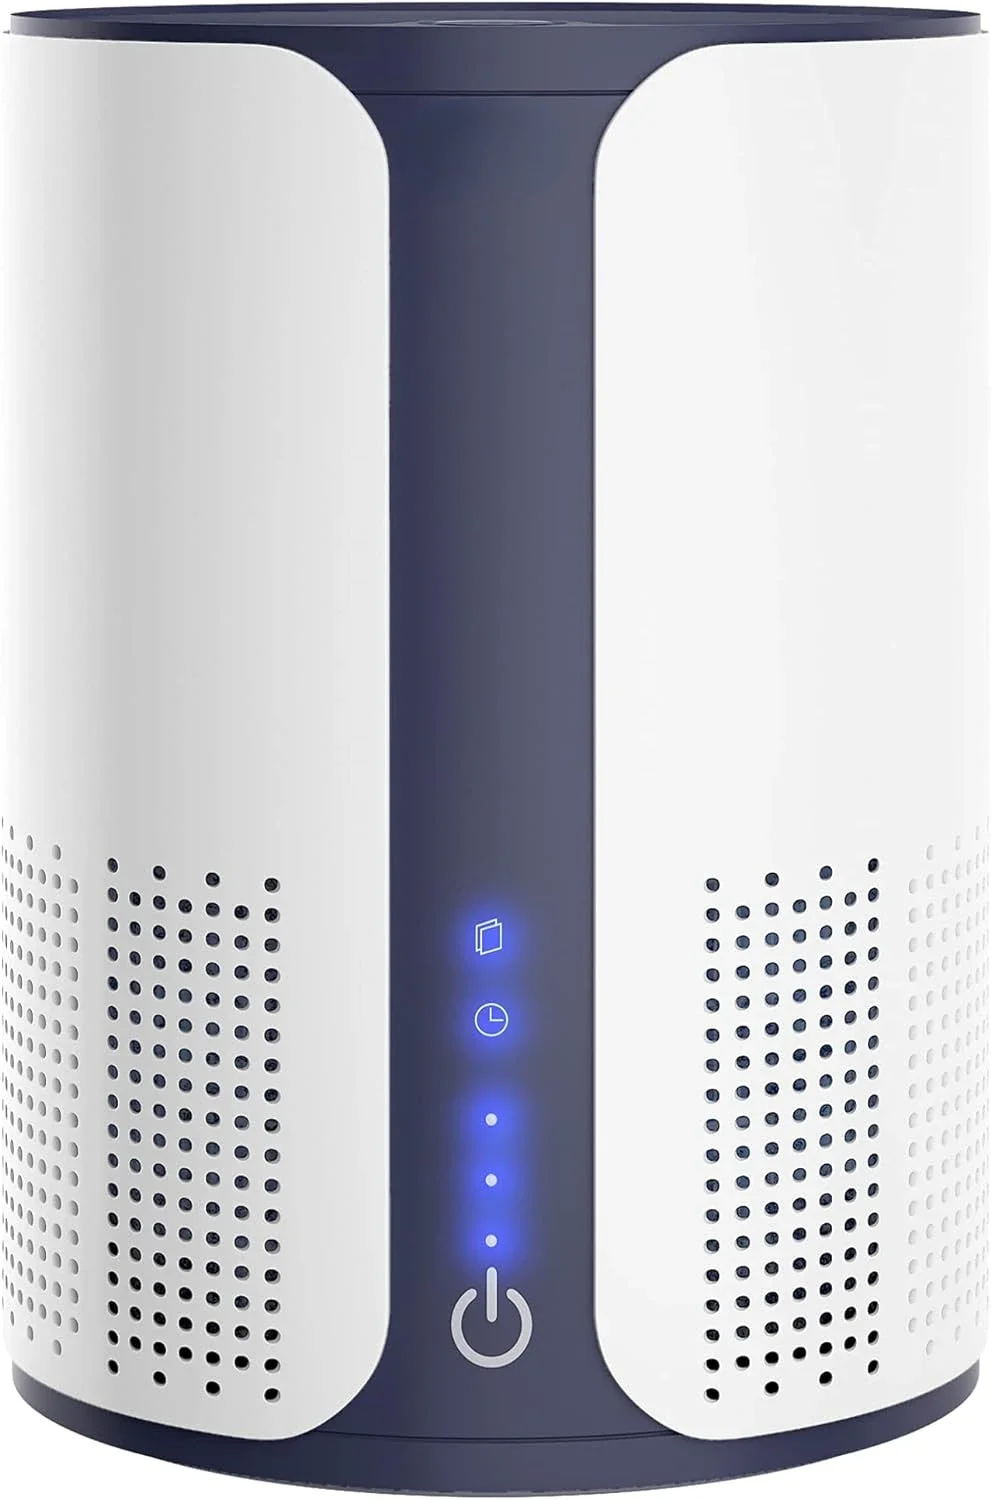 

True H1 HEPA Large Room Air Purifier - High Efficiency Air Filtration System Covers Up To 925 sqft, 3 Quiet Fan Speeds, Conveni